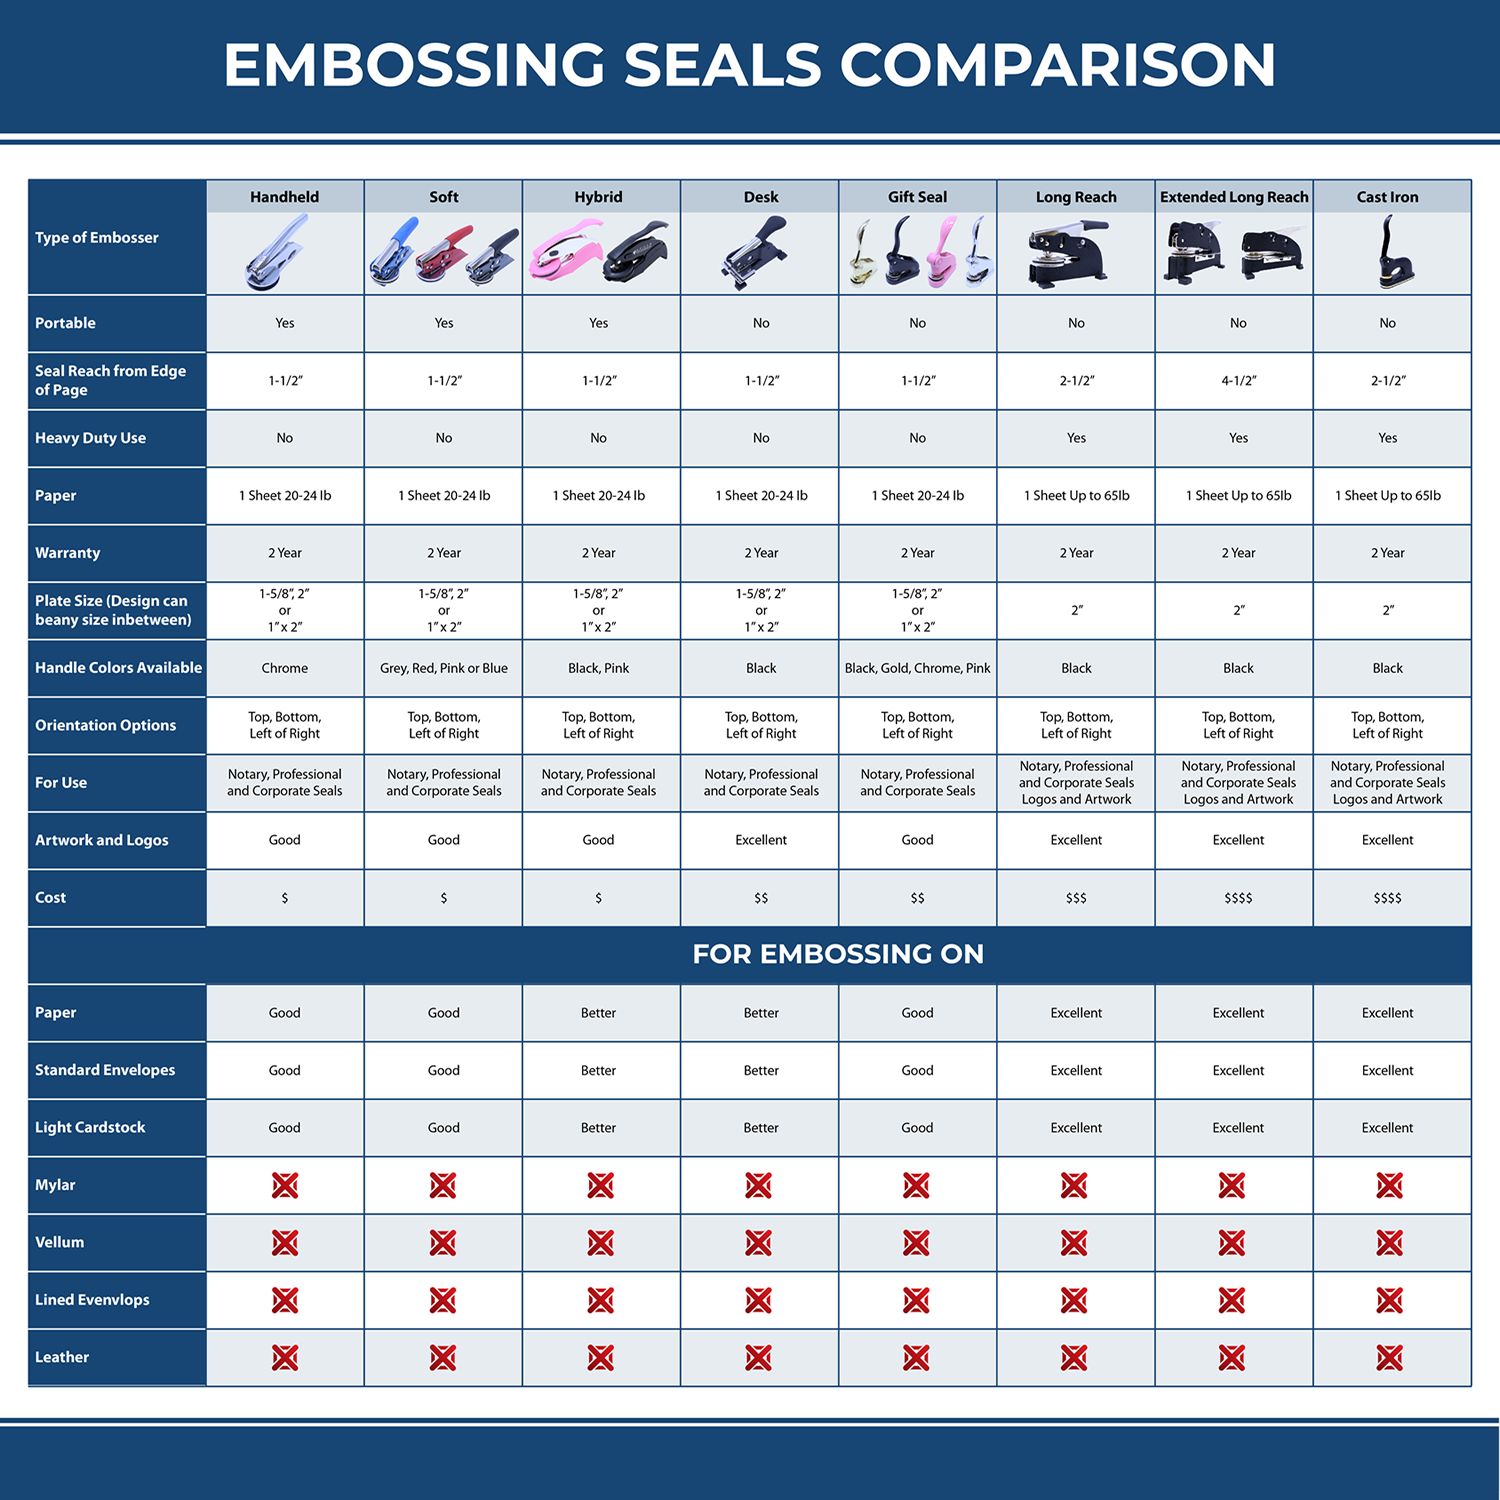 A comparison chart for the different types of mount models available for the Heavy Duty Kentucky Landscape Architect Cast Iron Embosser.